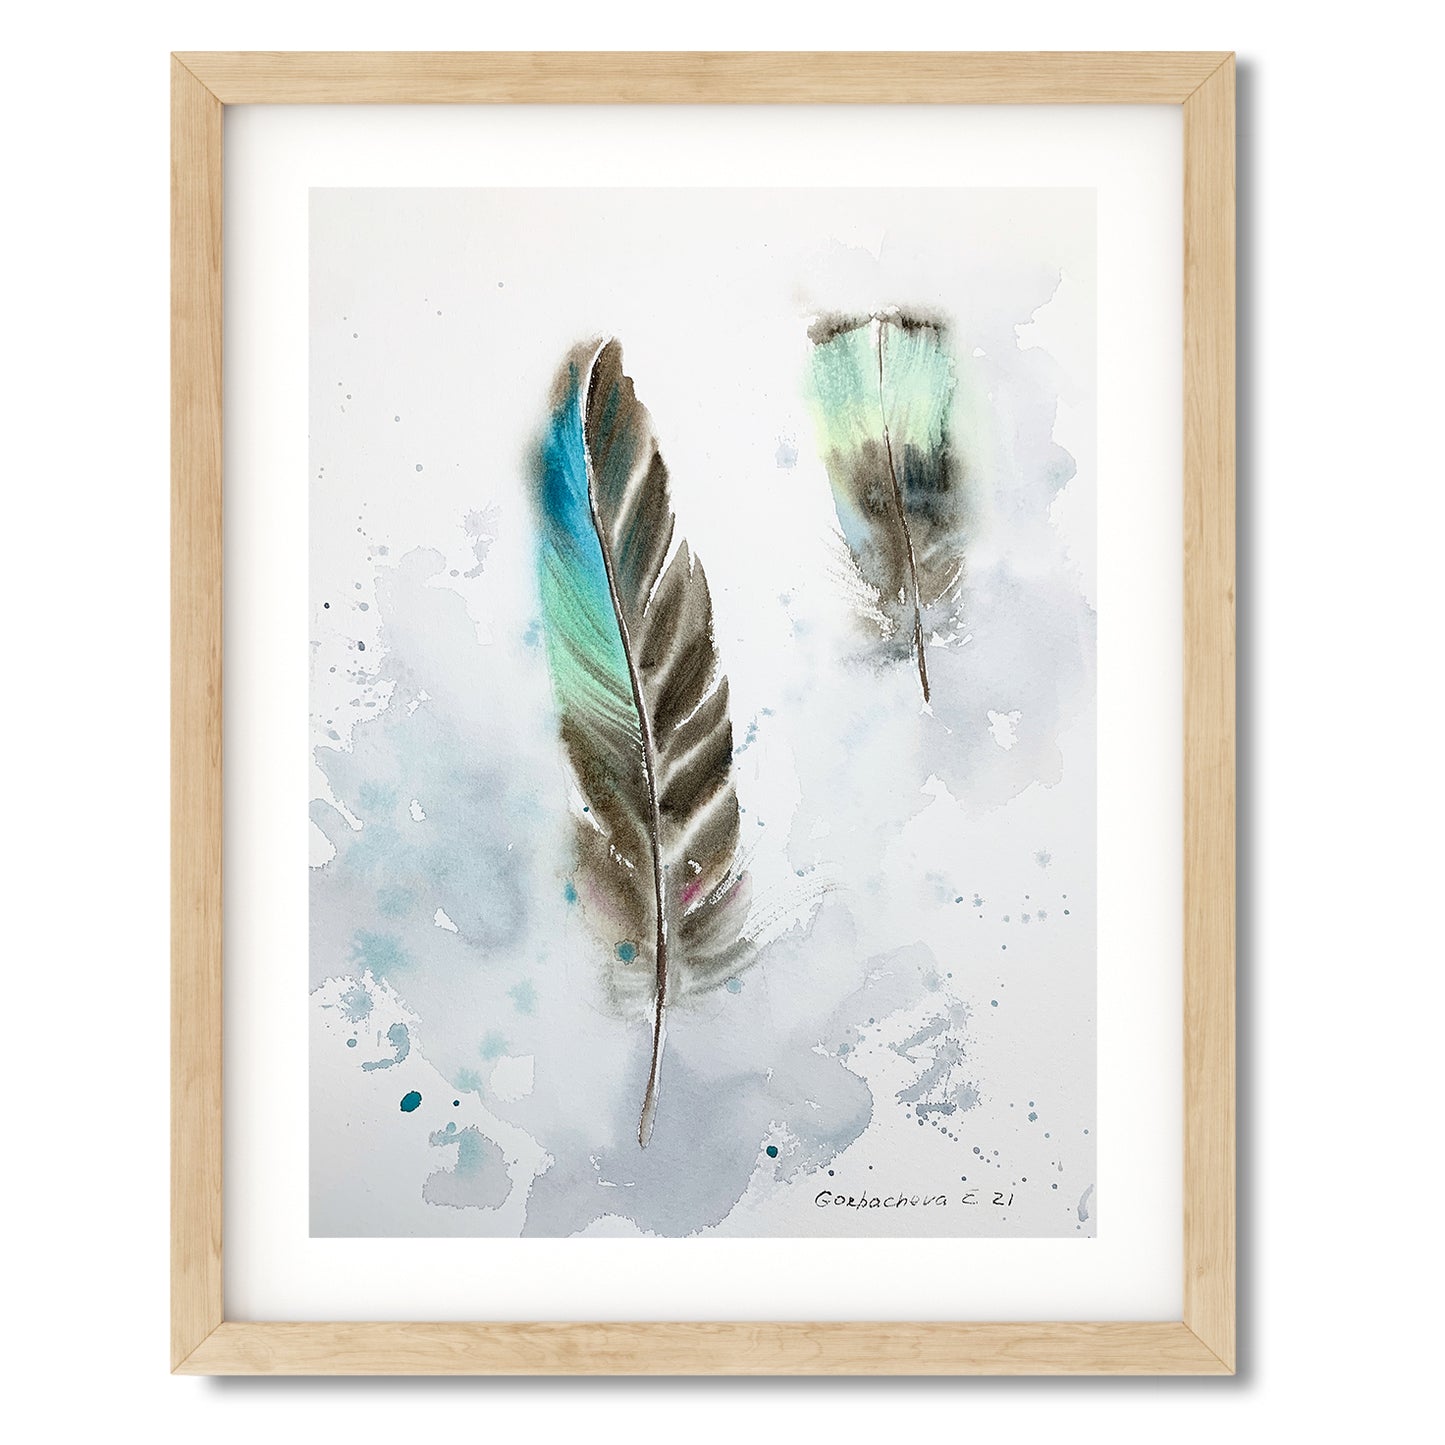 Gray Feather Painting Watercolor Original, Bird Art, Artwork for Gift, Wall Décoration | NOT A PRINT